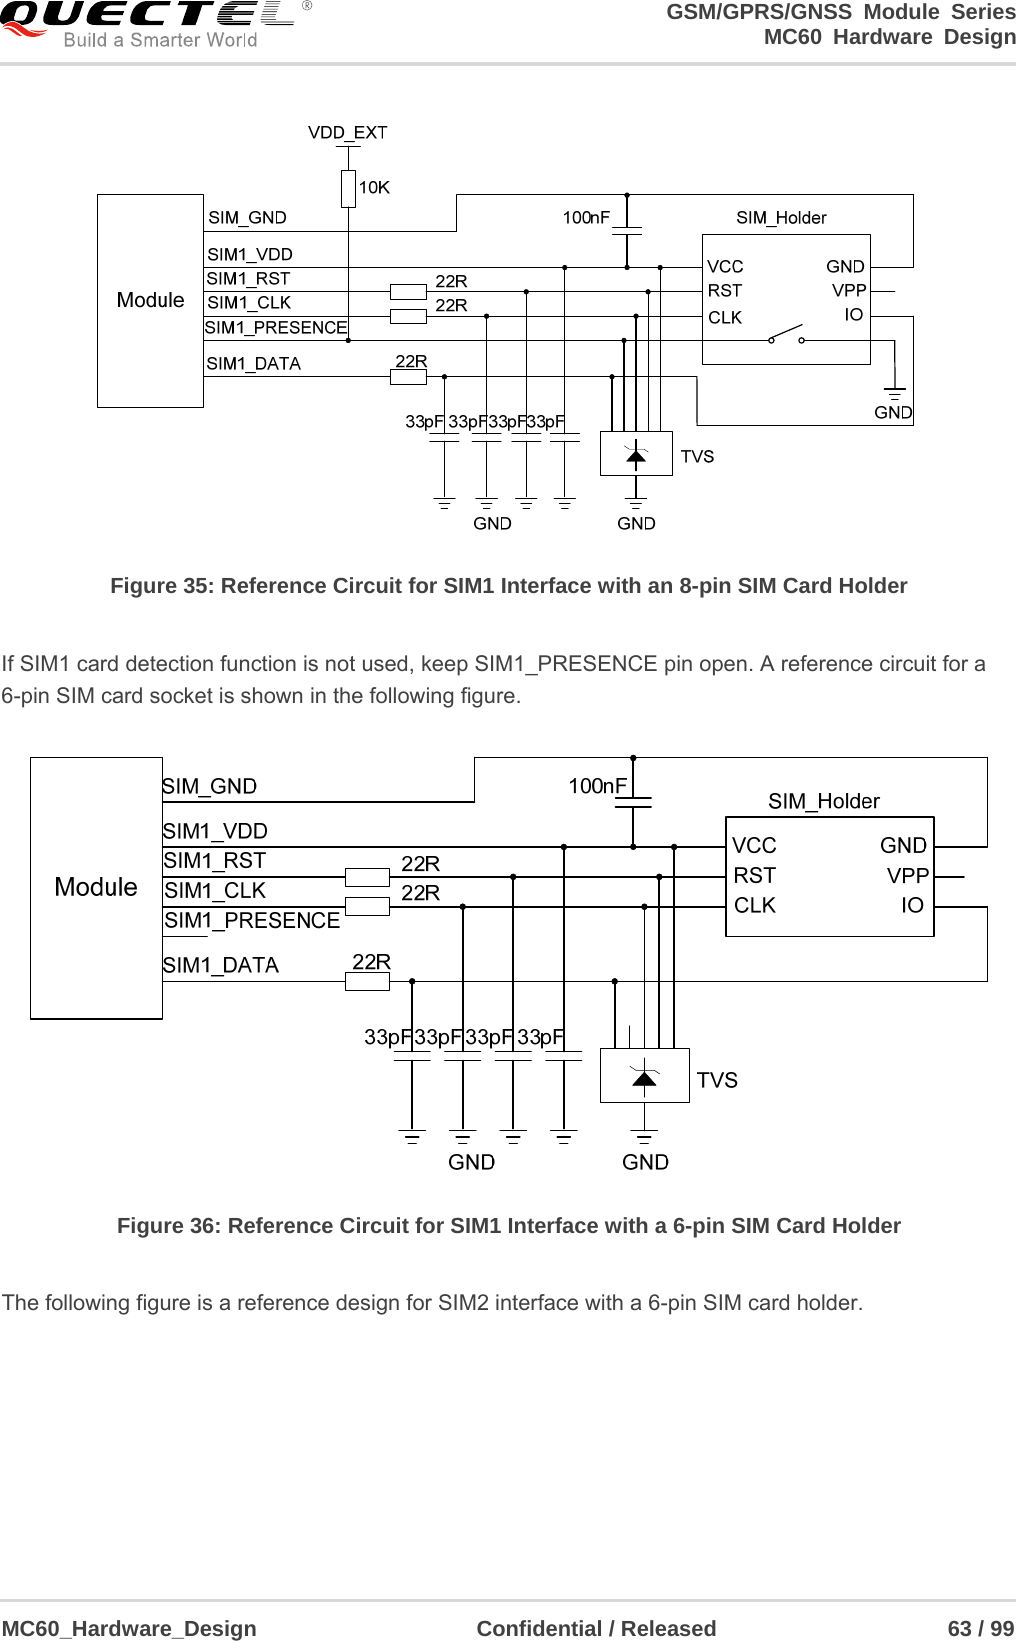                                                                     GSM/GPRS/GNSS Module Series                                                                 MC60 Hardware Design  MC60_Hardware_Design                    Confidential / Released                     63 / 99      Figure 35: Reference Circuit for SIM1 Interface with an 8-pin SIM Card Holder  If SIM1 card detection function is not used, keep SIM1_PRESENCE pin open. A reference circuit for a 6-pin SIM card socket is shown in the following figure.  Figure 36: Reference Circuit for SIM1 Interface with a 6-pin SIM Card Holder  The following figure is a reference design for SIM2 interface with a 6-pin SIM card holder. 